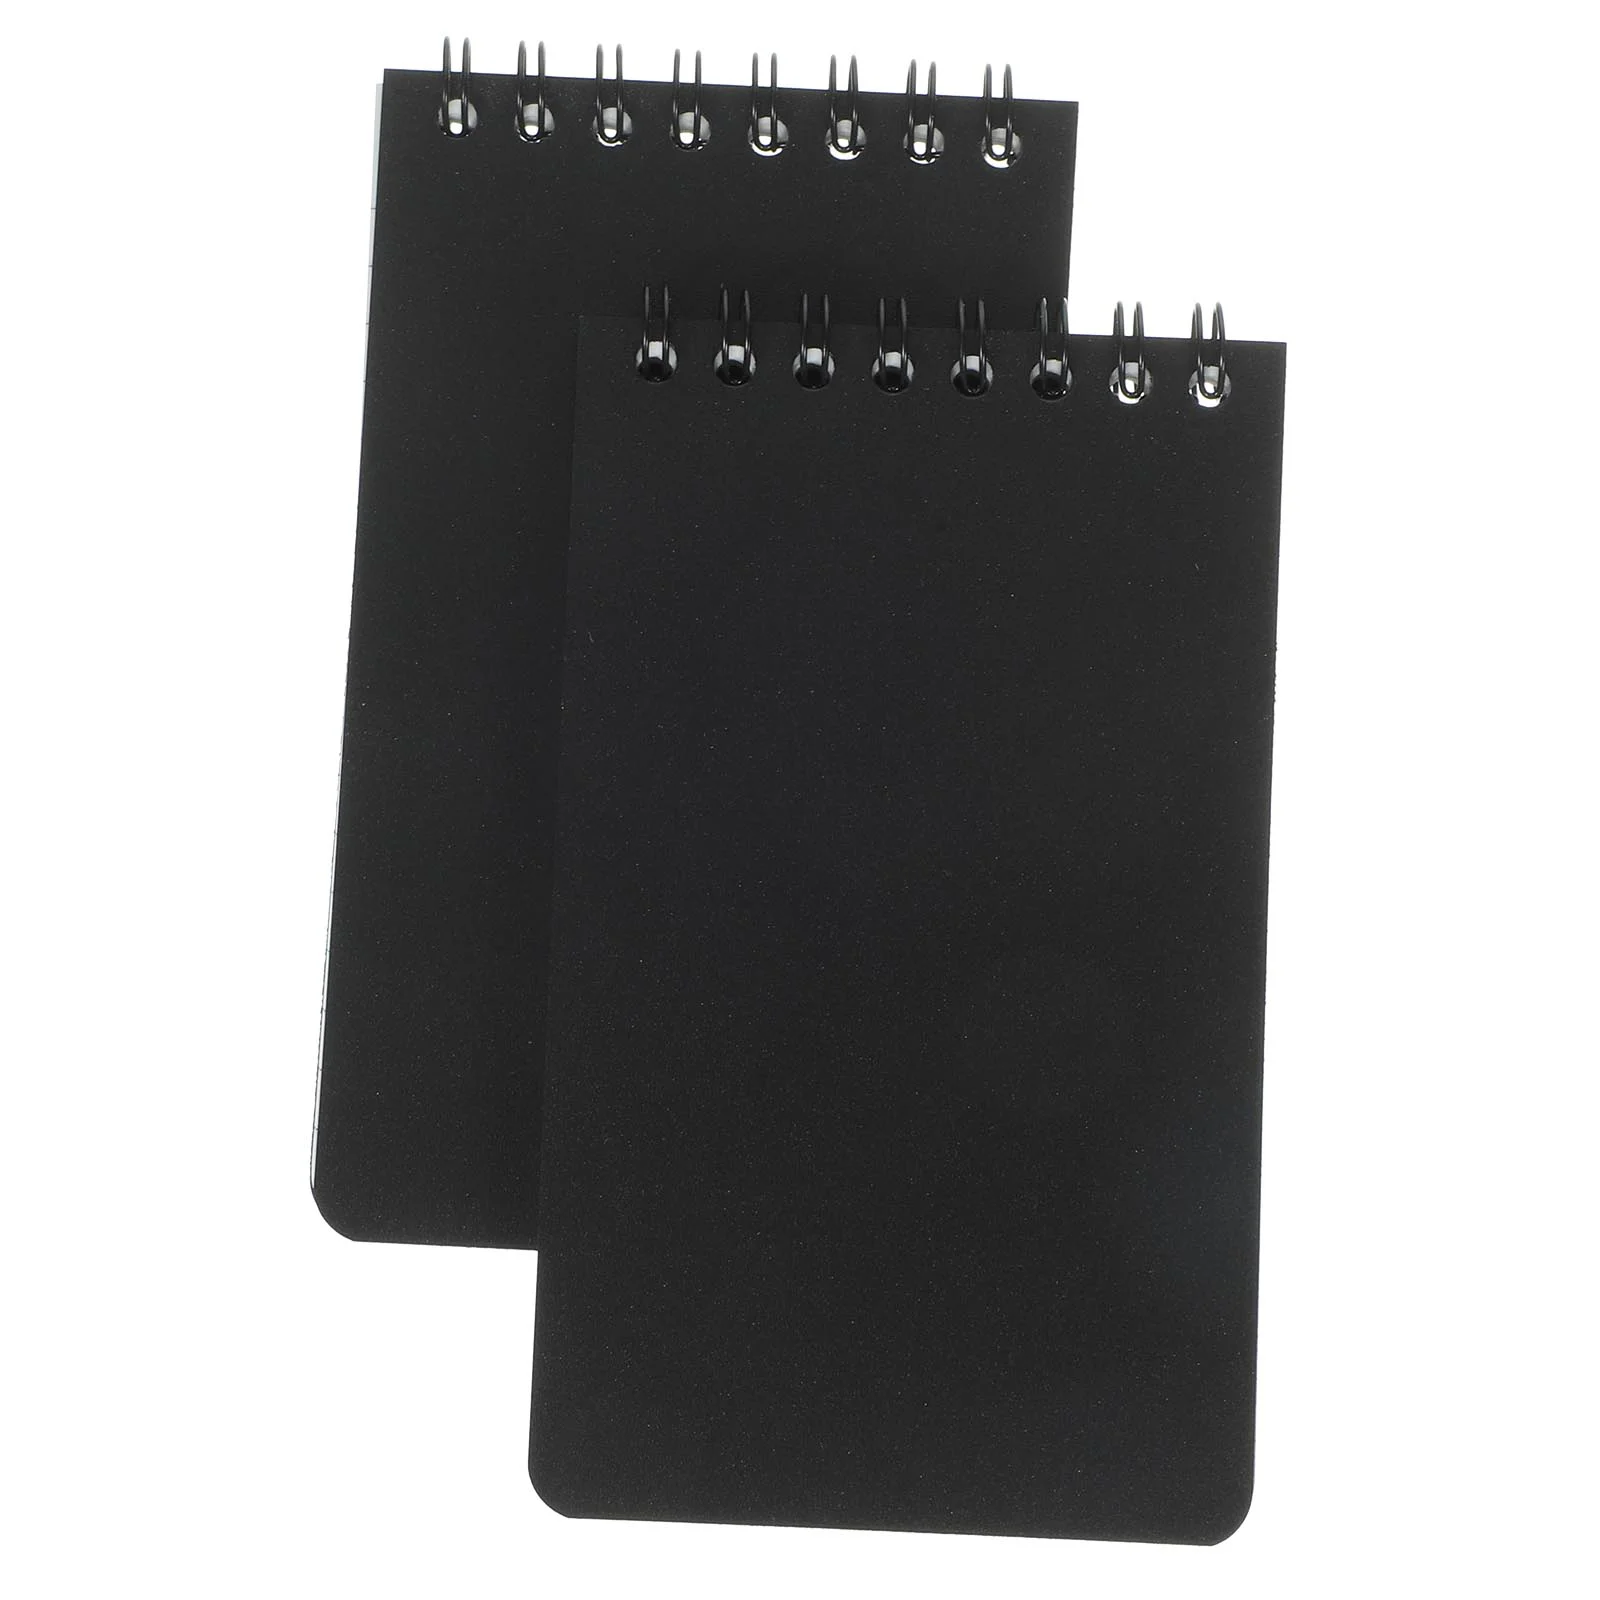 

2Pcs Small Memo Pads Spiral Binding Notepads Pocket Notebooks Small Planning Pads Notepads